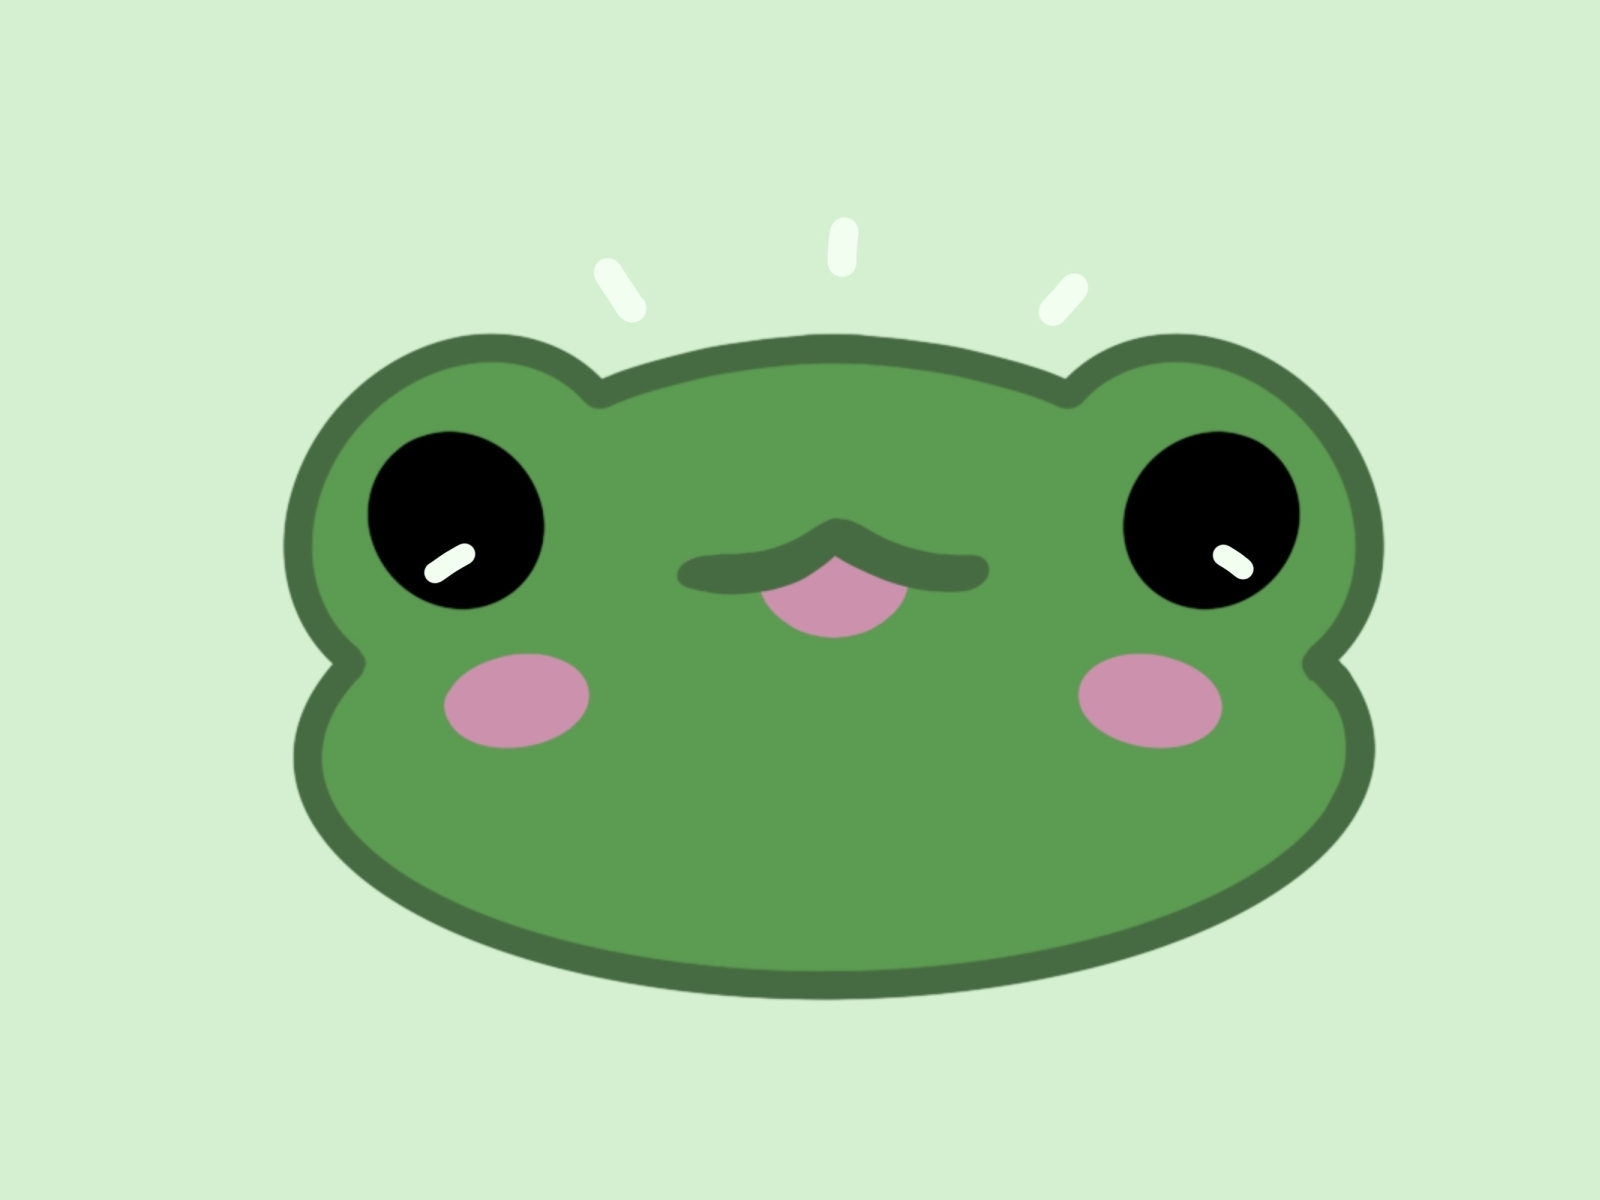 froggy frog by Floriane Barbotin on Dribbble